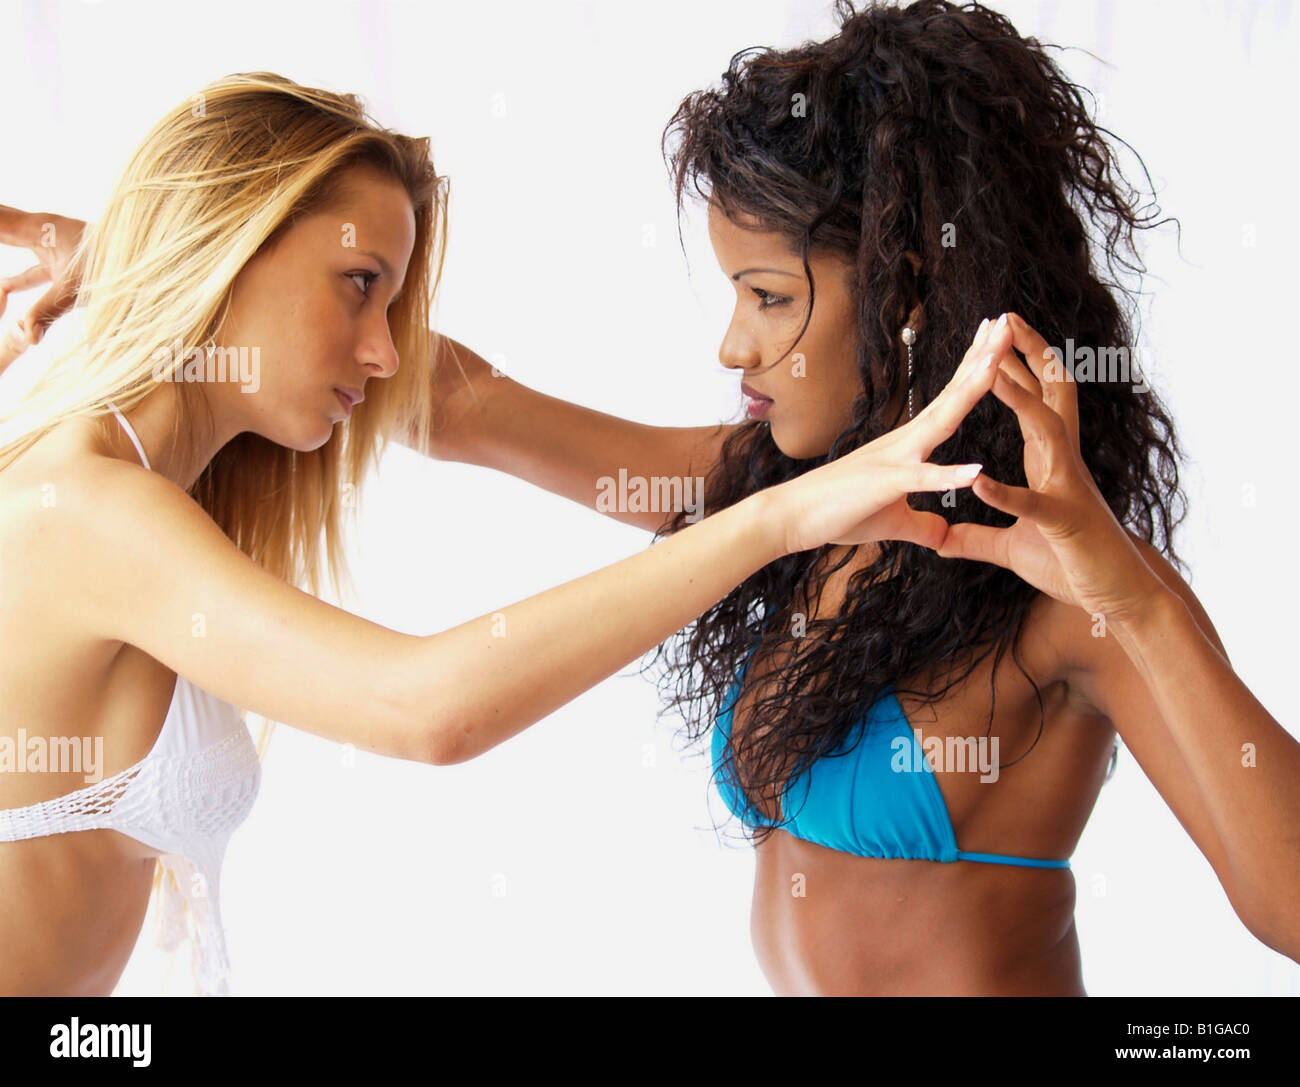 Side view of women fighting Stock Photo